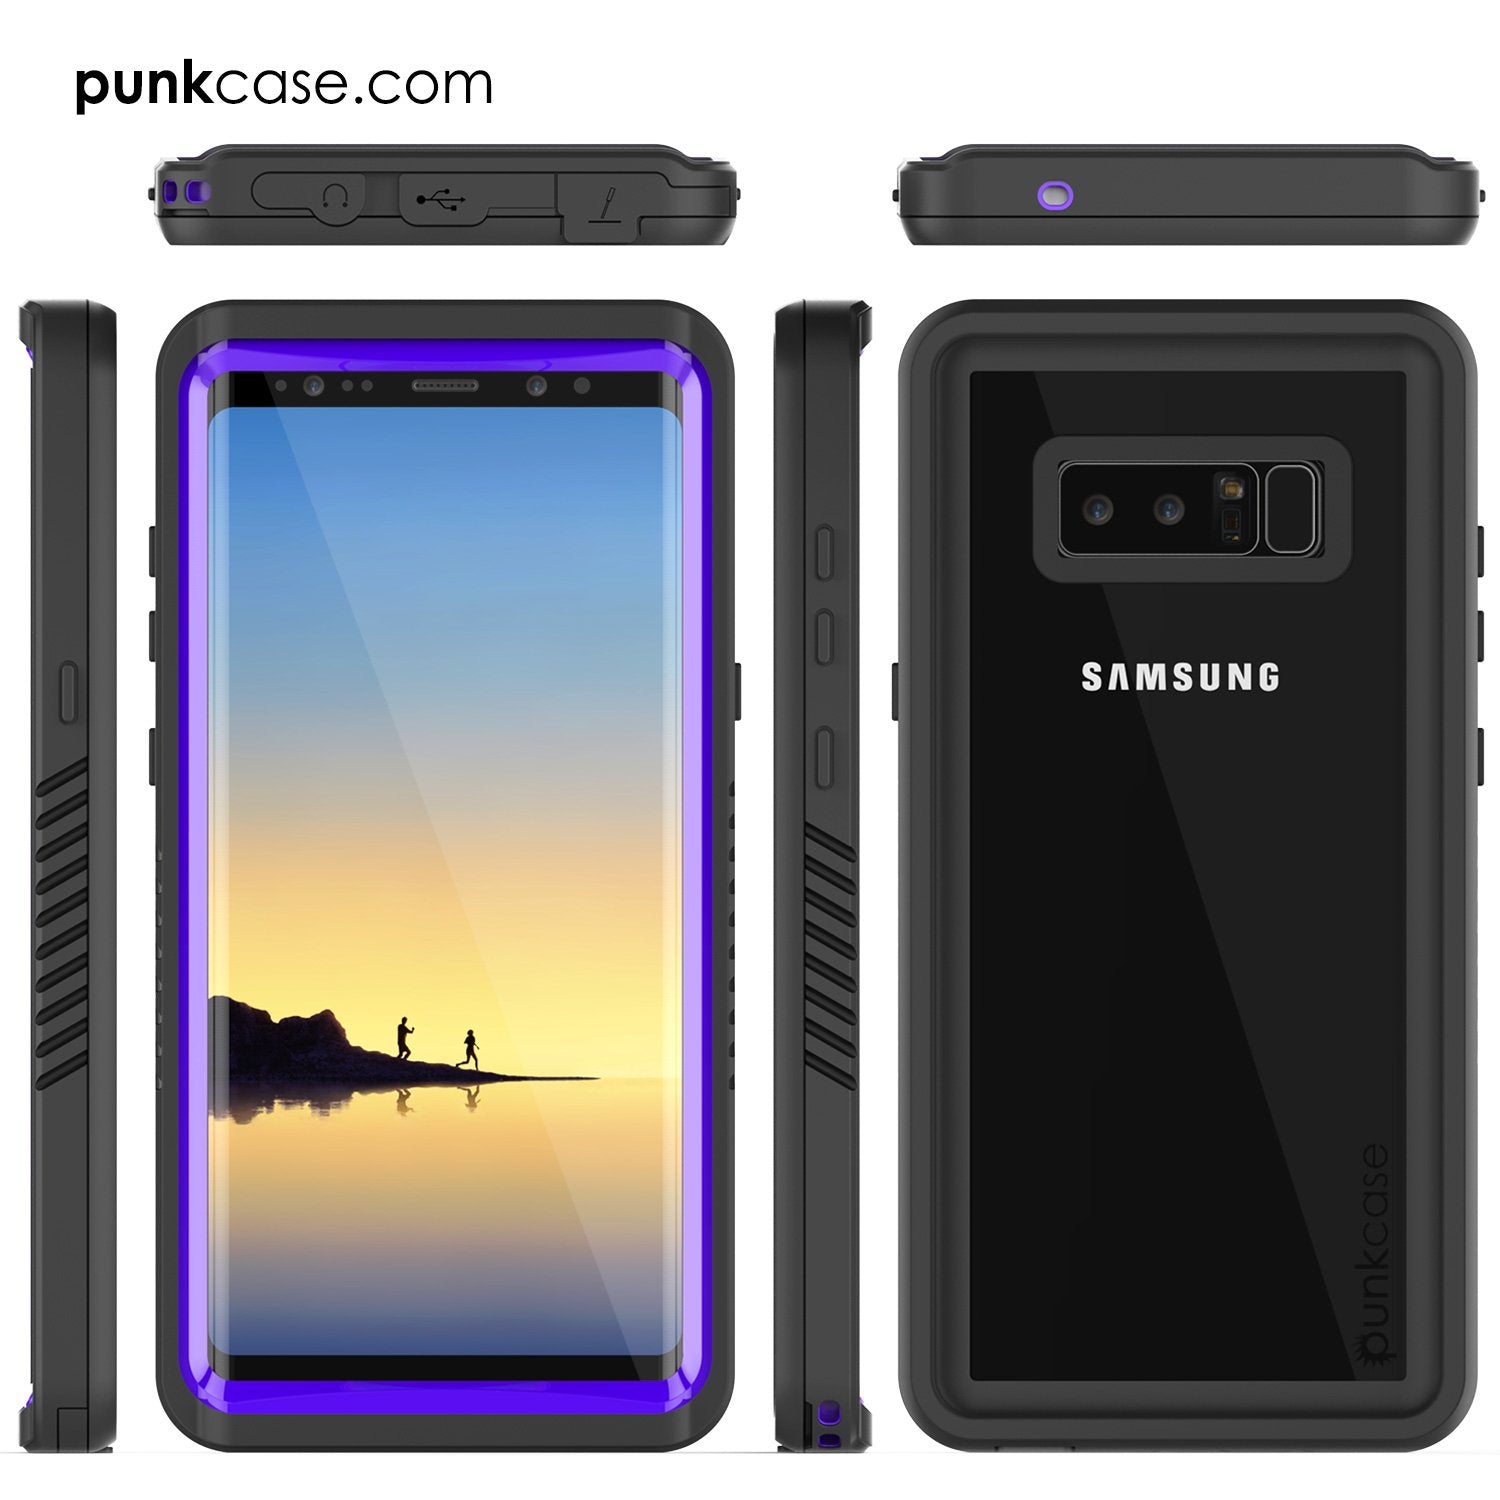 Galaxy Note 8 Case, Punkcase [Extreme Series] [Slim Fit] [IP68 Certified] [Shockproof] Armor Cover W/ Built In Screen Protector [Purple]